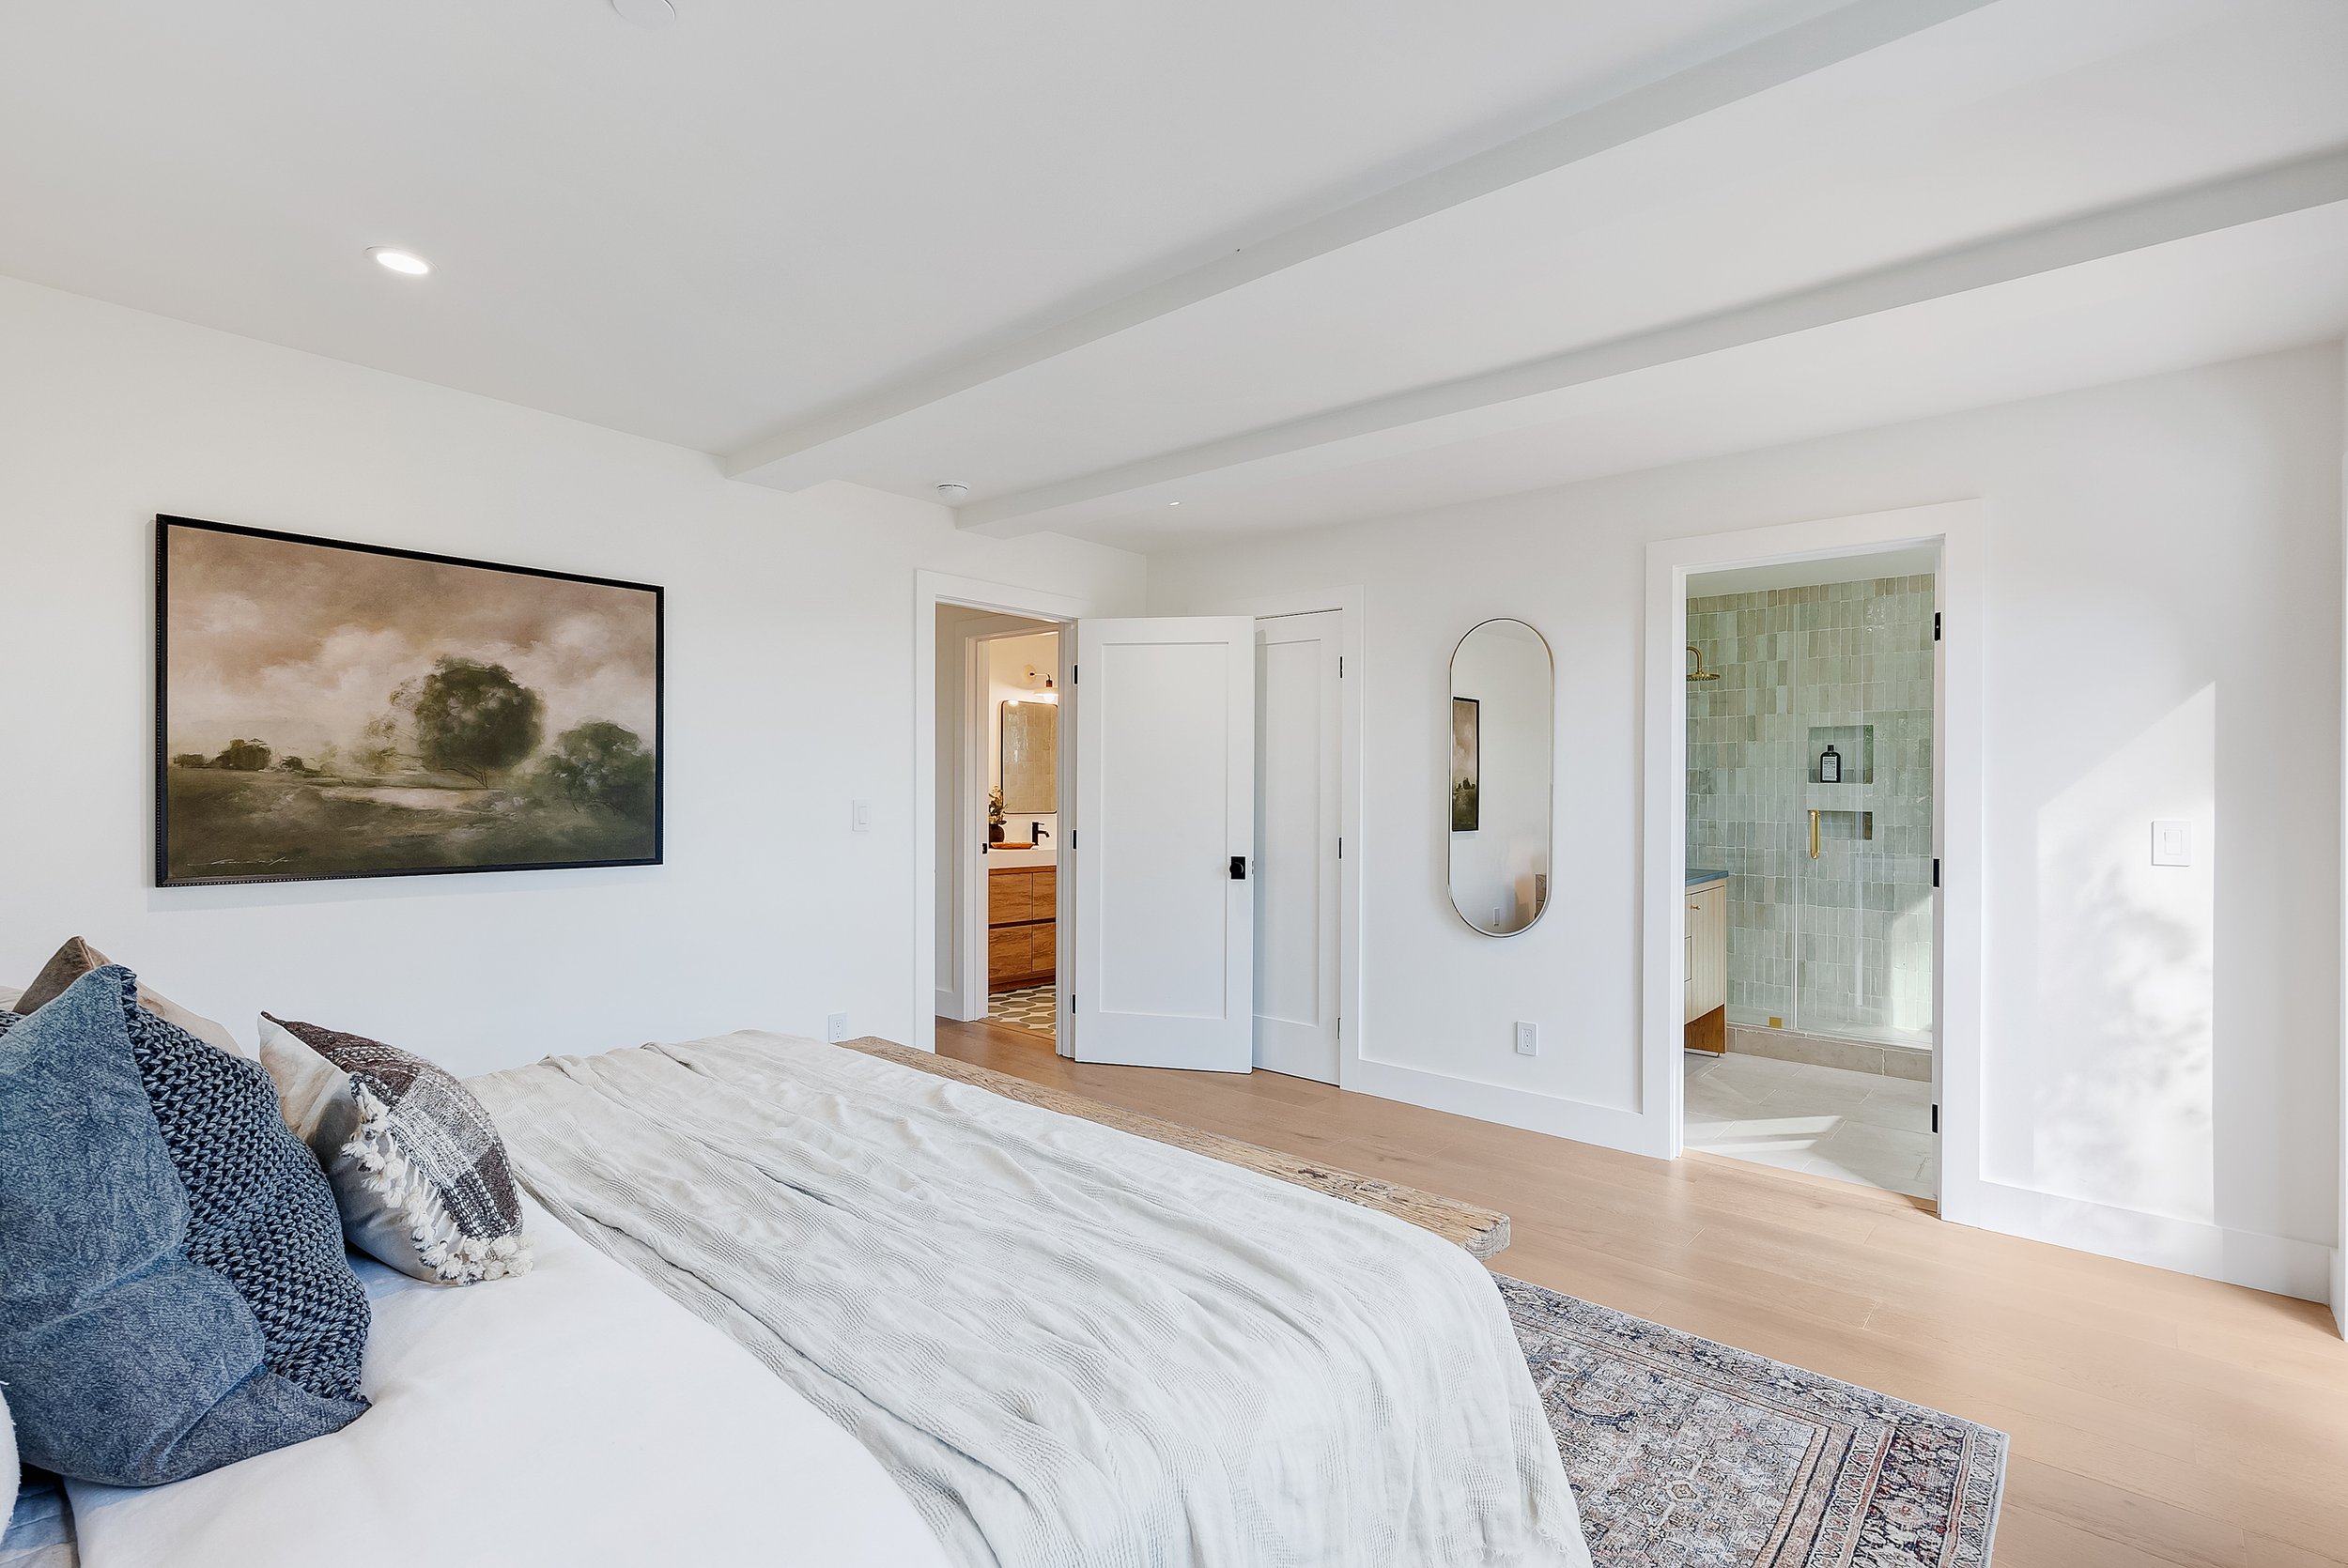 243 Perry Street Mill Valley Real Estate For Sale by Mill Valley Best Realtor Allie Fornesi at Own Marin Real Estate-37.jpg